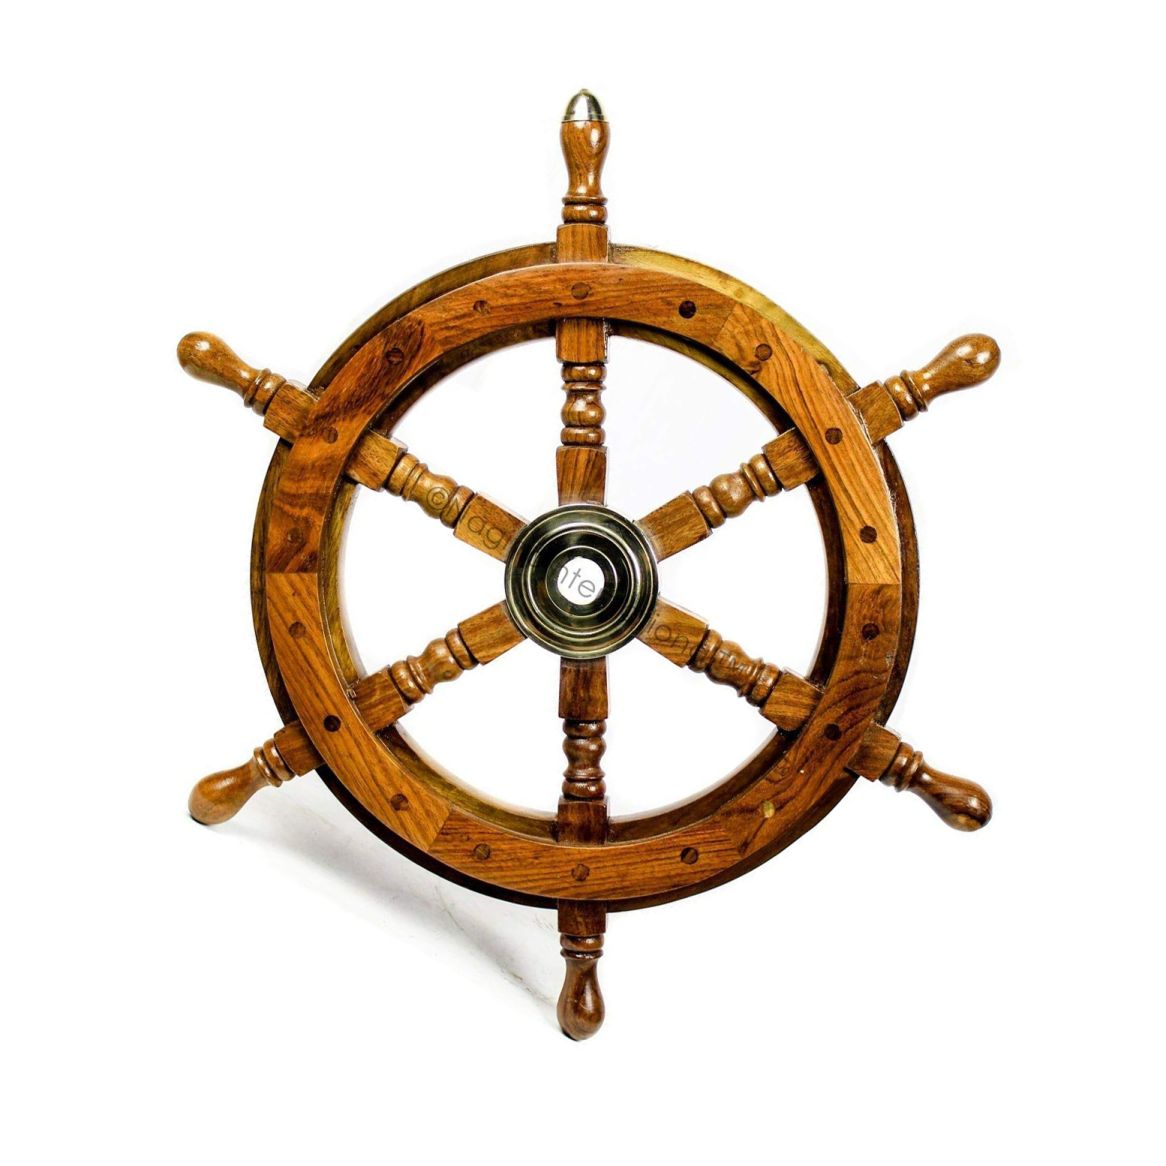 Wheel Wooden Steering Nautical Vintage Boat Ship Collectible home Decor Antique 